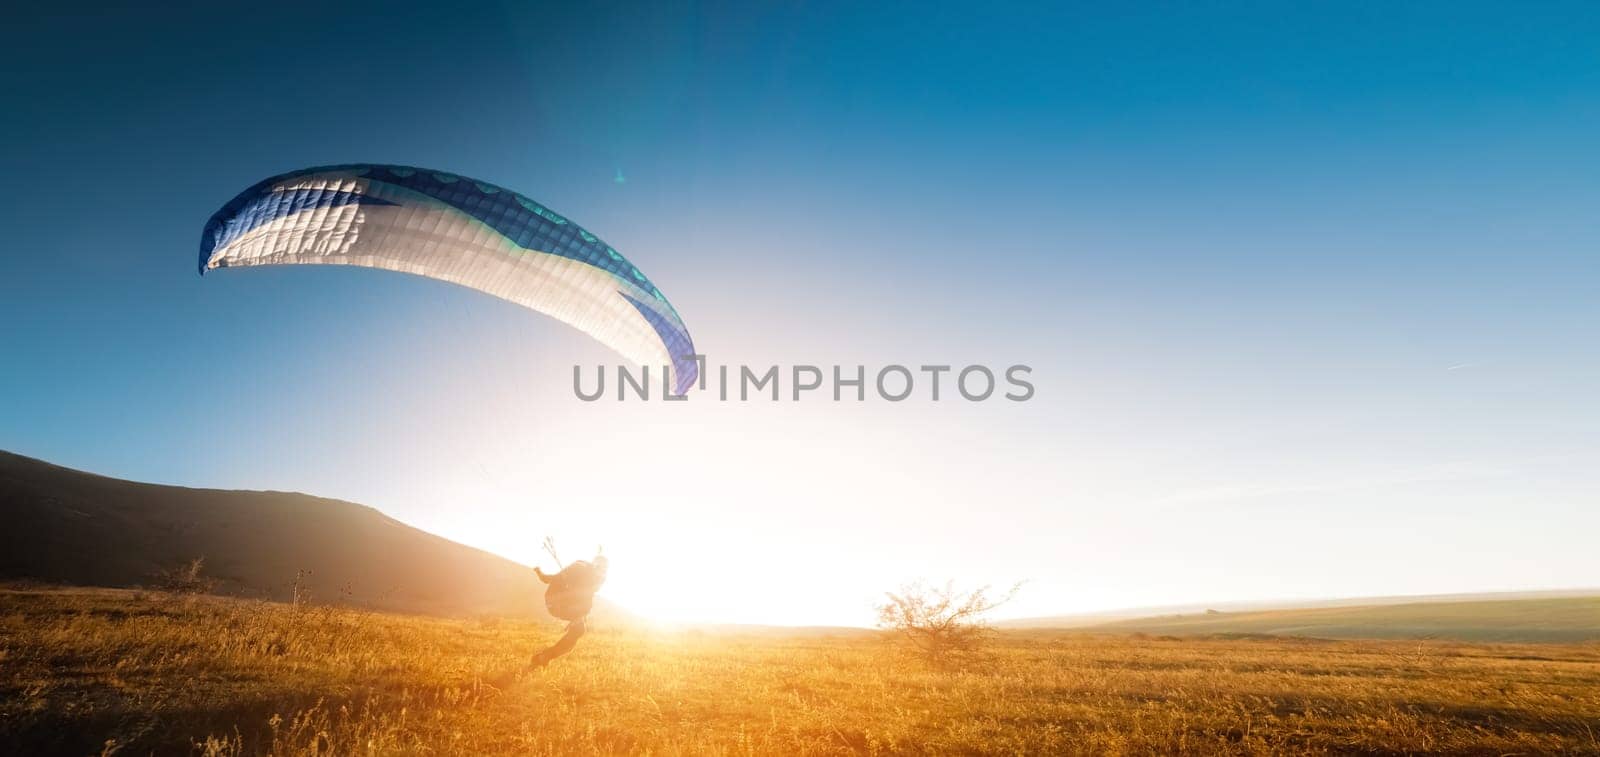 A paraglider glides along the ground at sunset with mountains in the background. Panoramic shot banner for paragliding in warm colors. Glare from the sun in the frame.